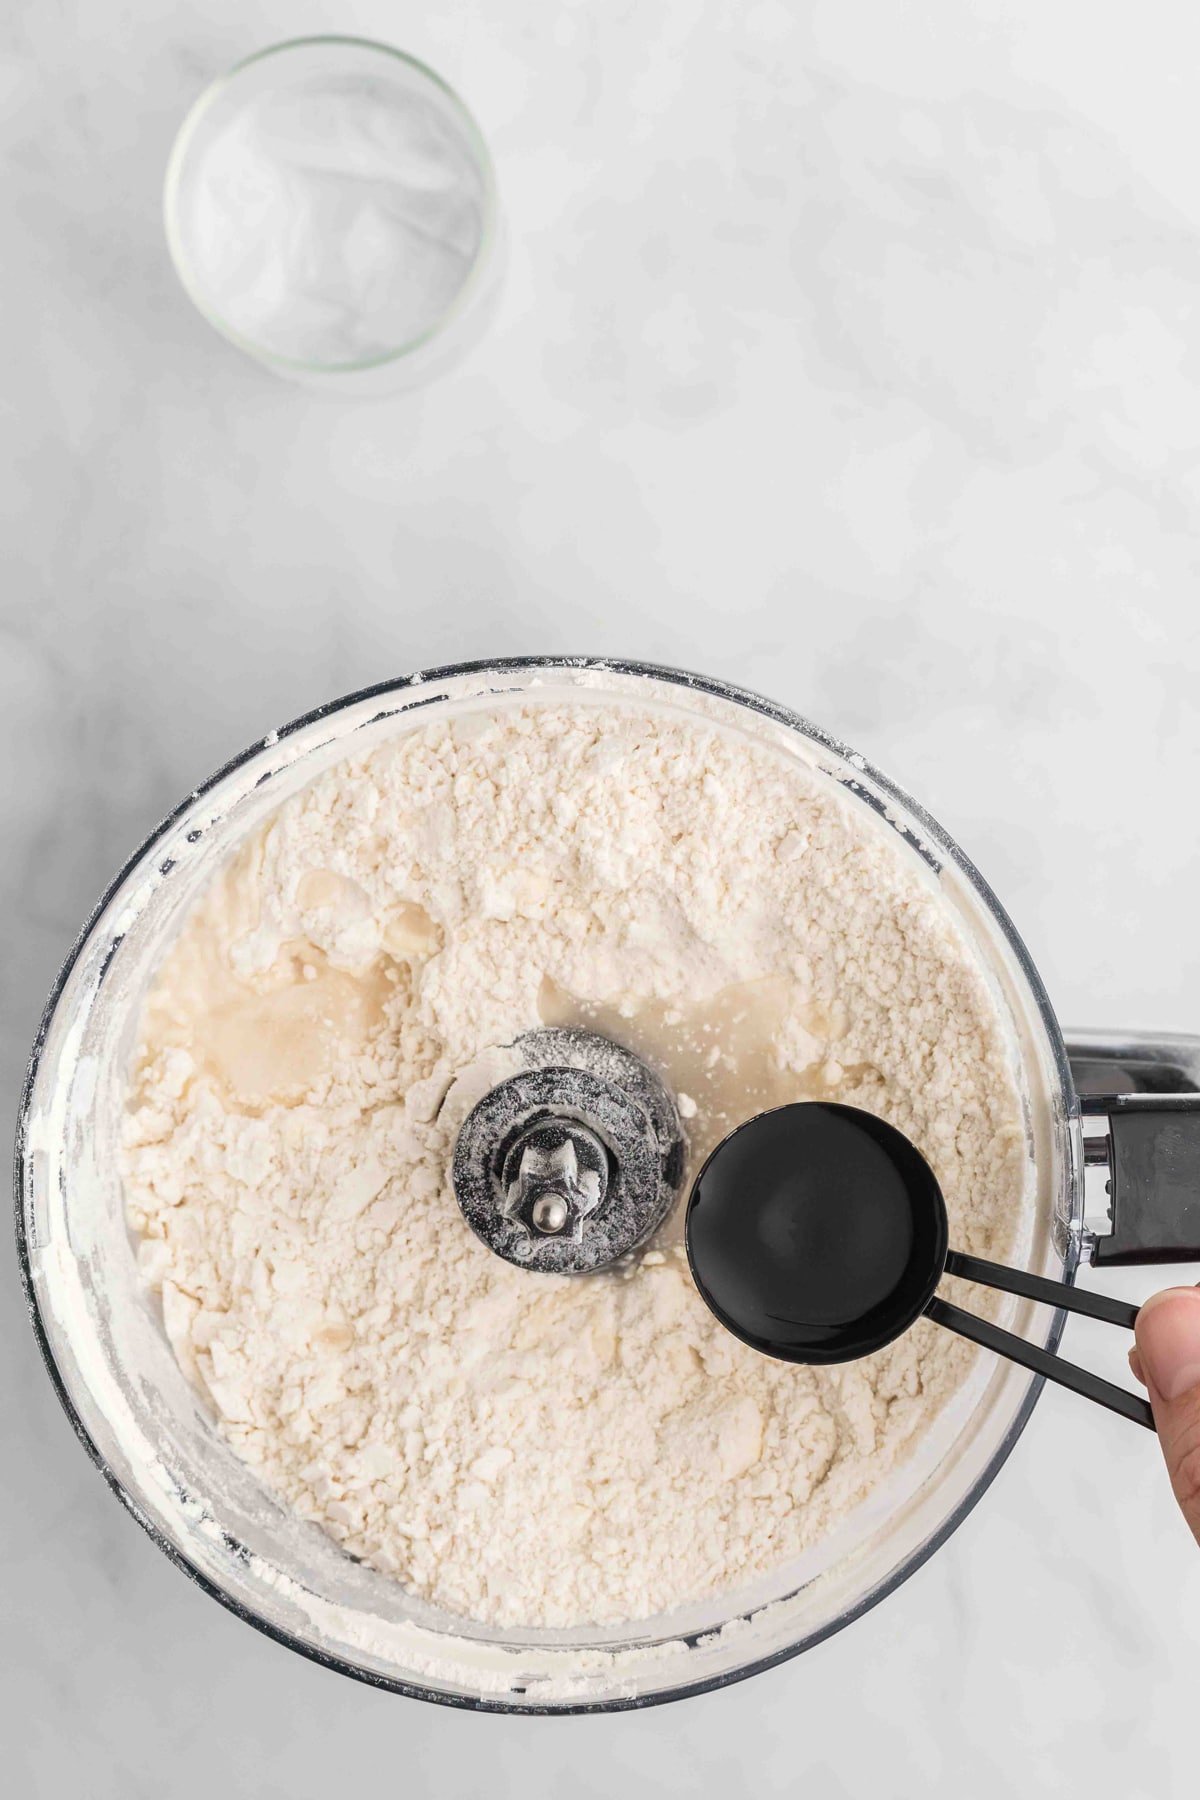 Water being added to flour in a food processor